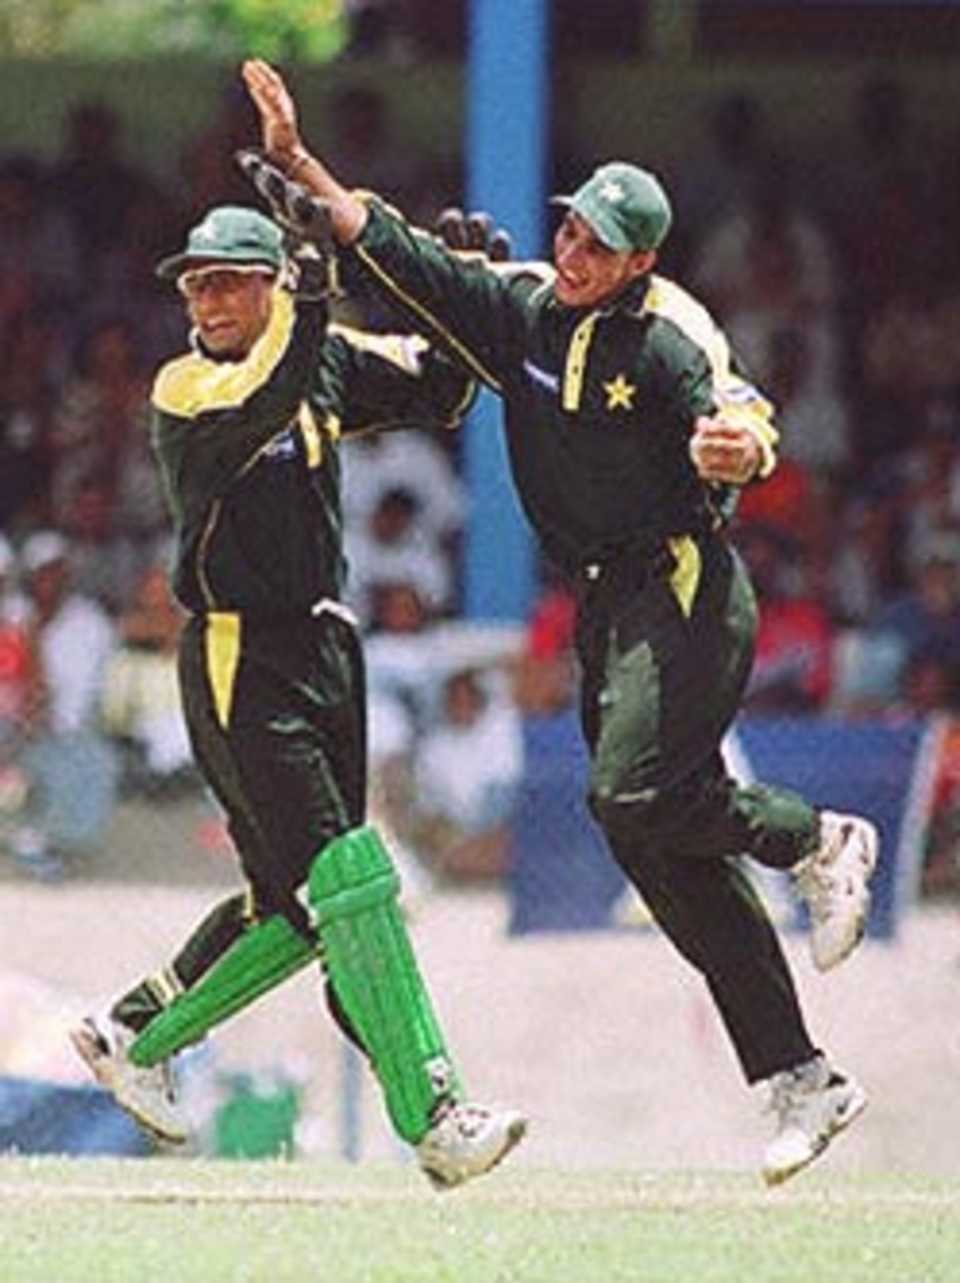 Pakistan's Imran Nazir (R) celebrates with Moin Khan aftercatching West Indie's Batsman Ridley Jacobs  during their match in Port of Spain, Trinidad and Tobago. Third final, Cable and Wireless Series, 23rd April 2000.